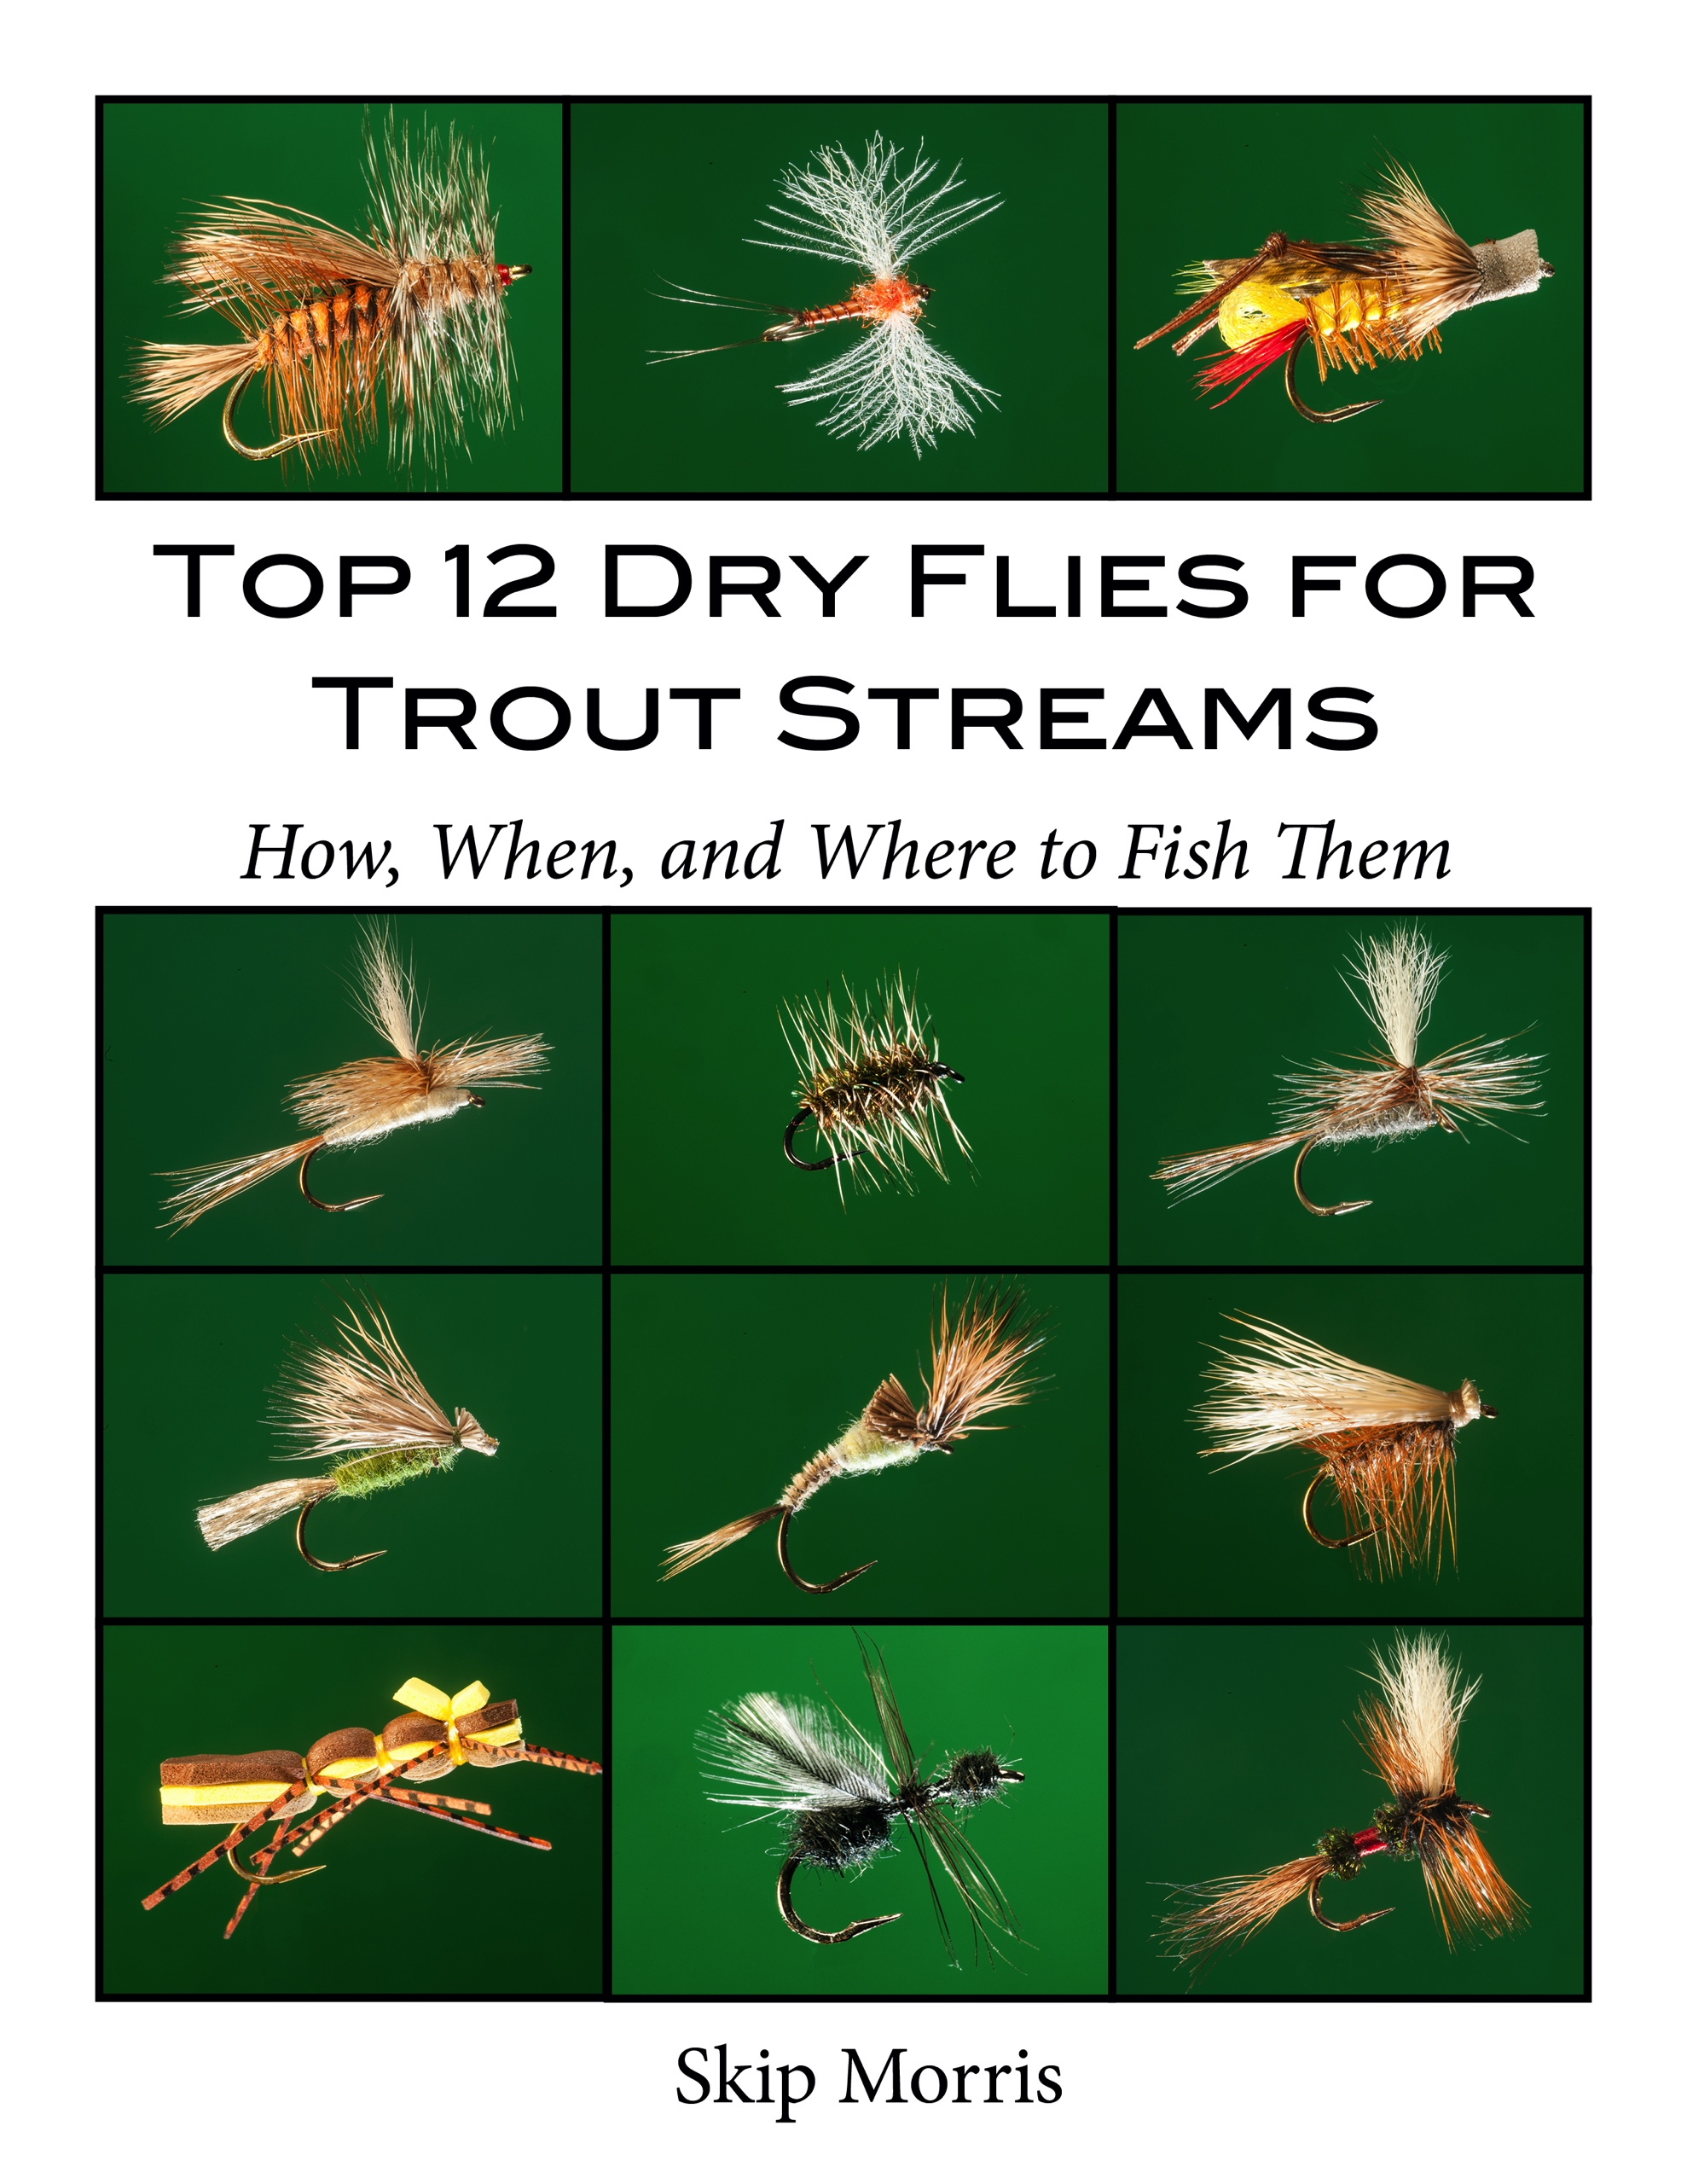 Orange Silly Leg Stimulator Fly Fishing Dry Trout Flies Size 10 DEADLY NEW  FLIES